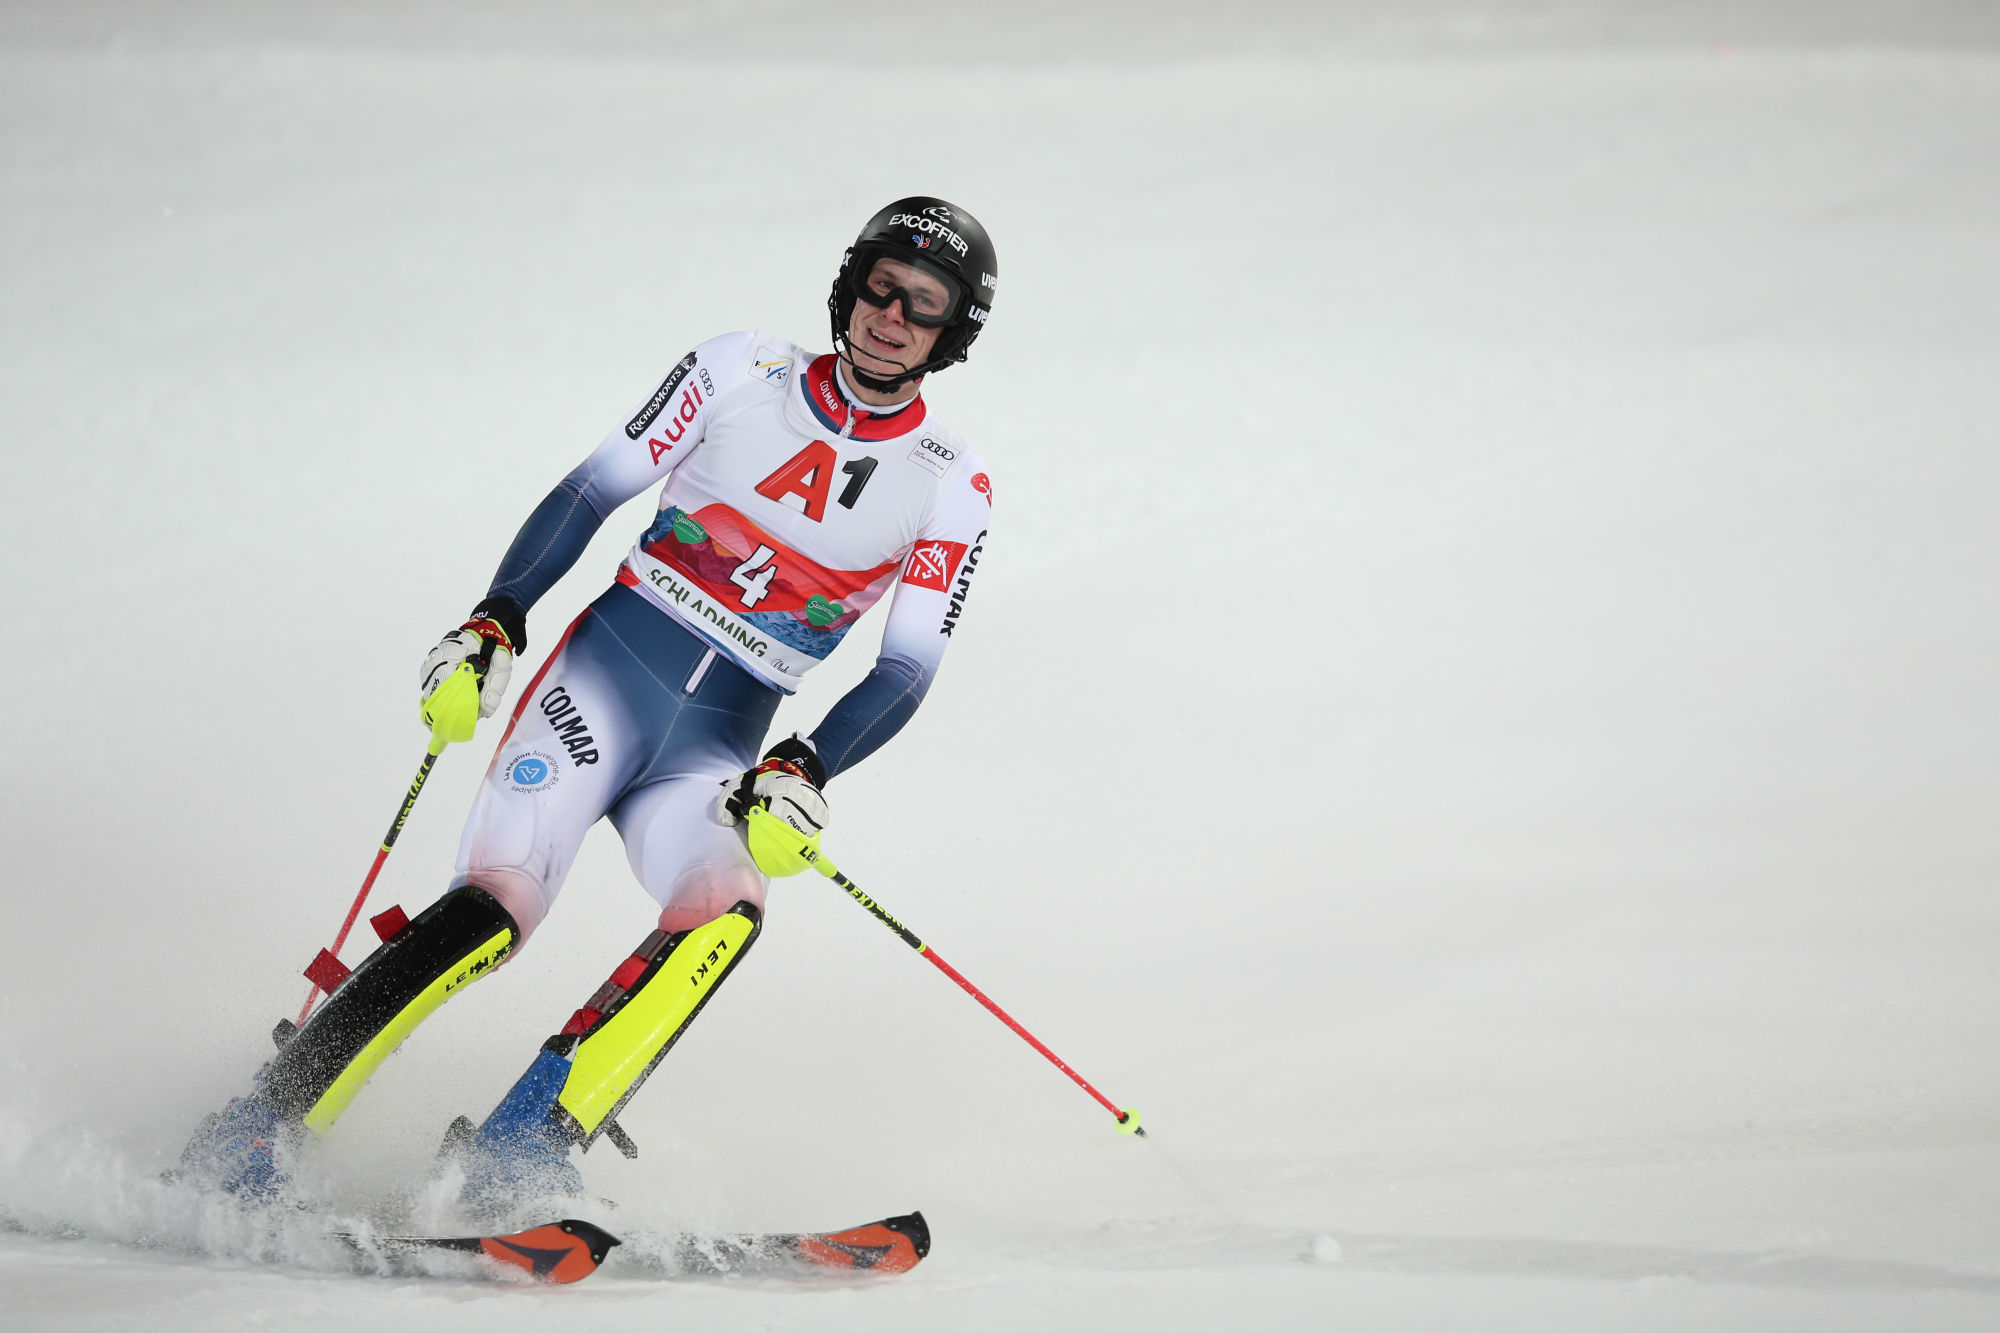 Clement Noel (FRA). Photo: GEPA pictures/ Harald Steiner / Icon Sport